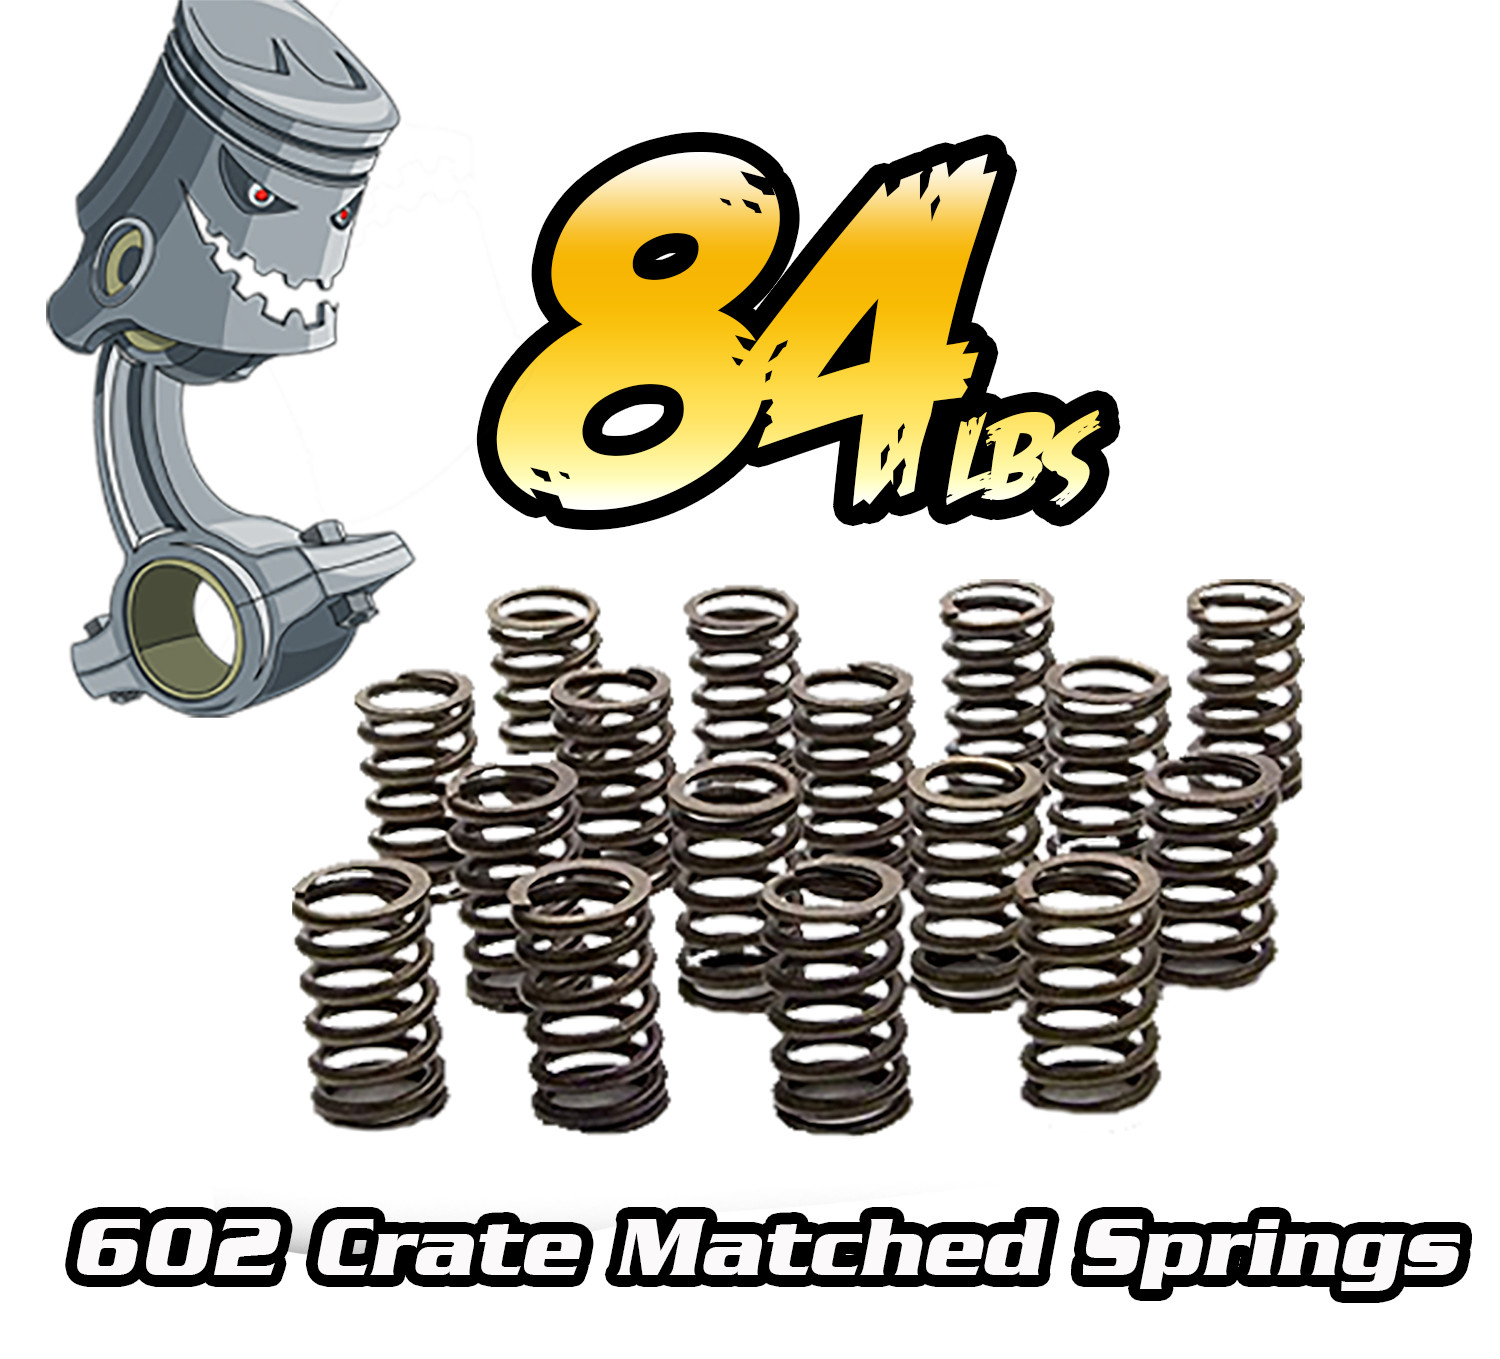 Super Rare 84lb GM Matched Valve Springs for 602 Crate